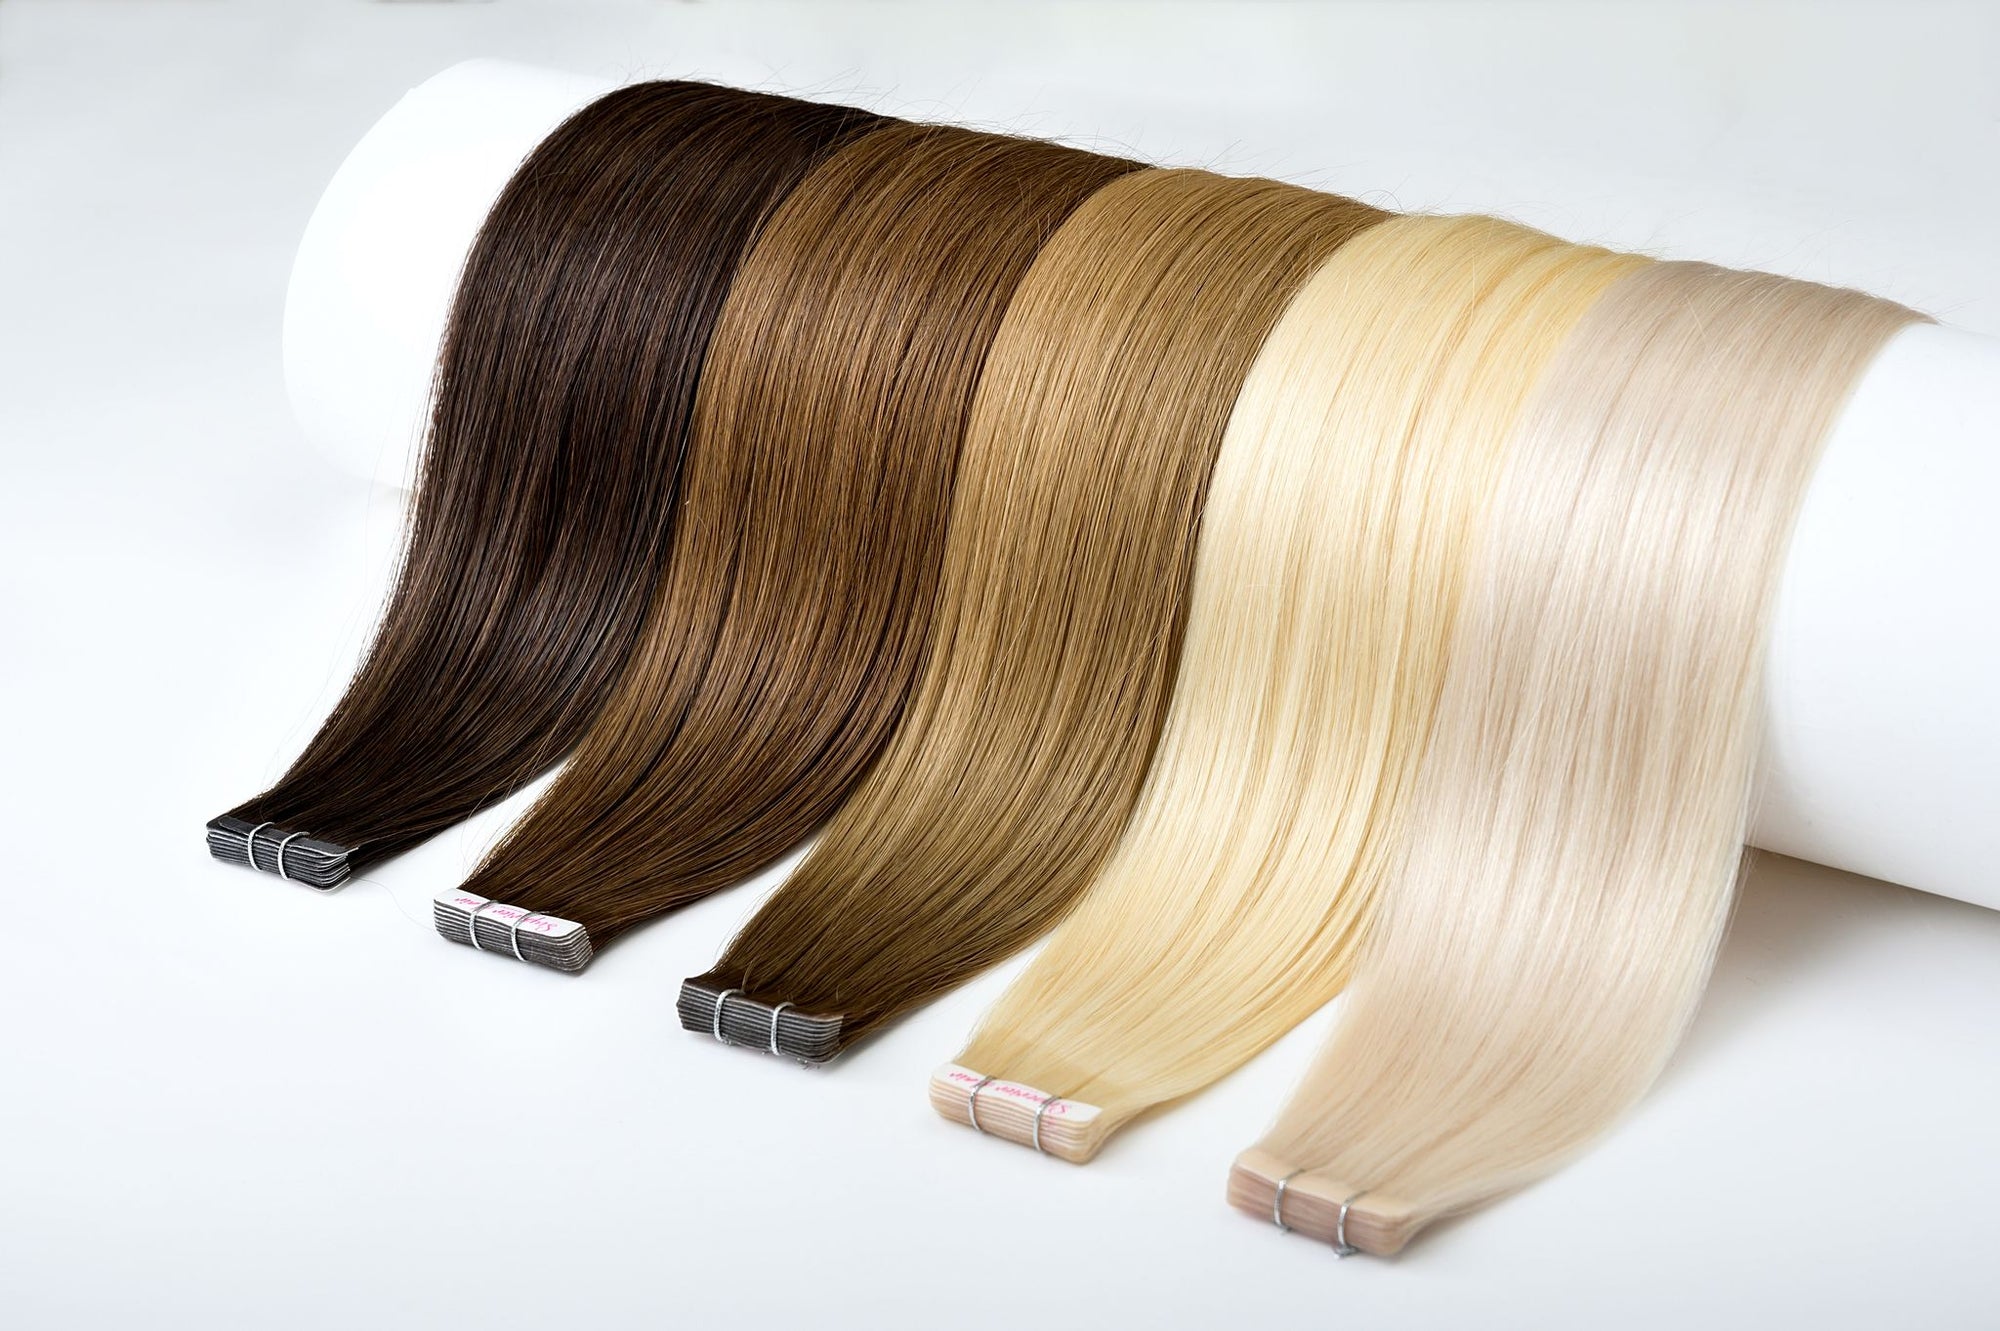 What causes human hair extensions to vary in quality?